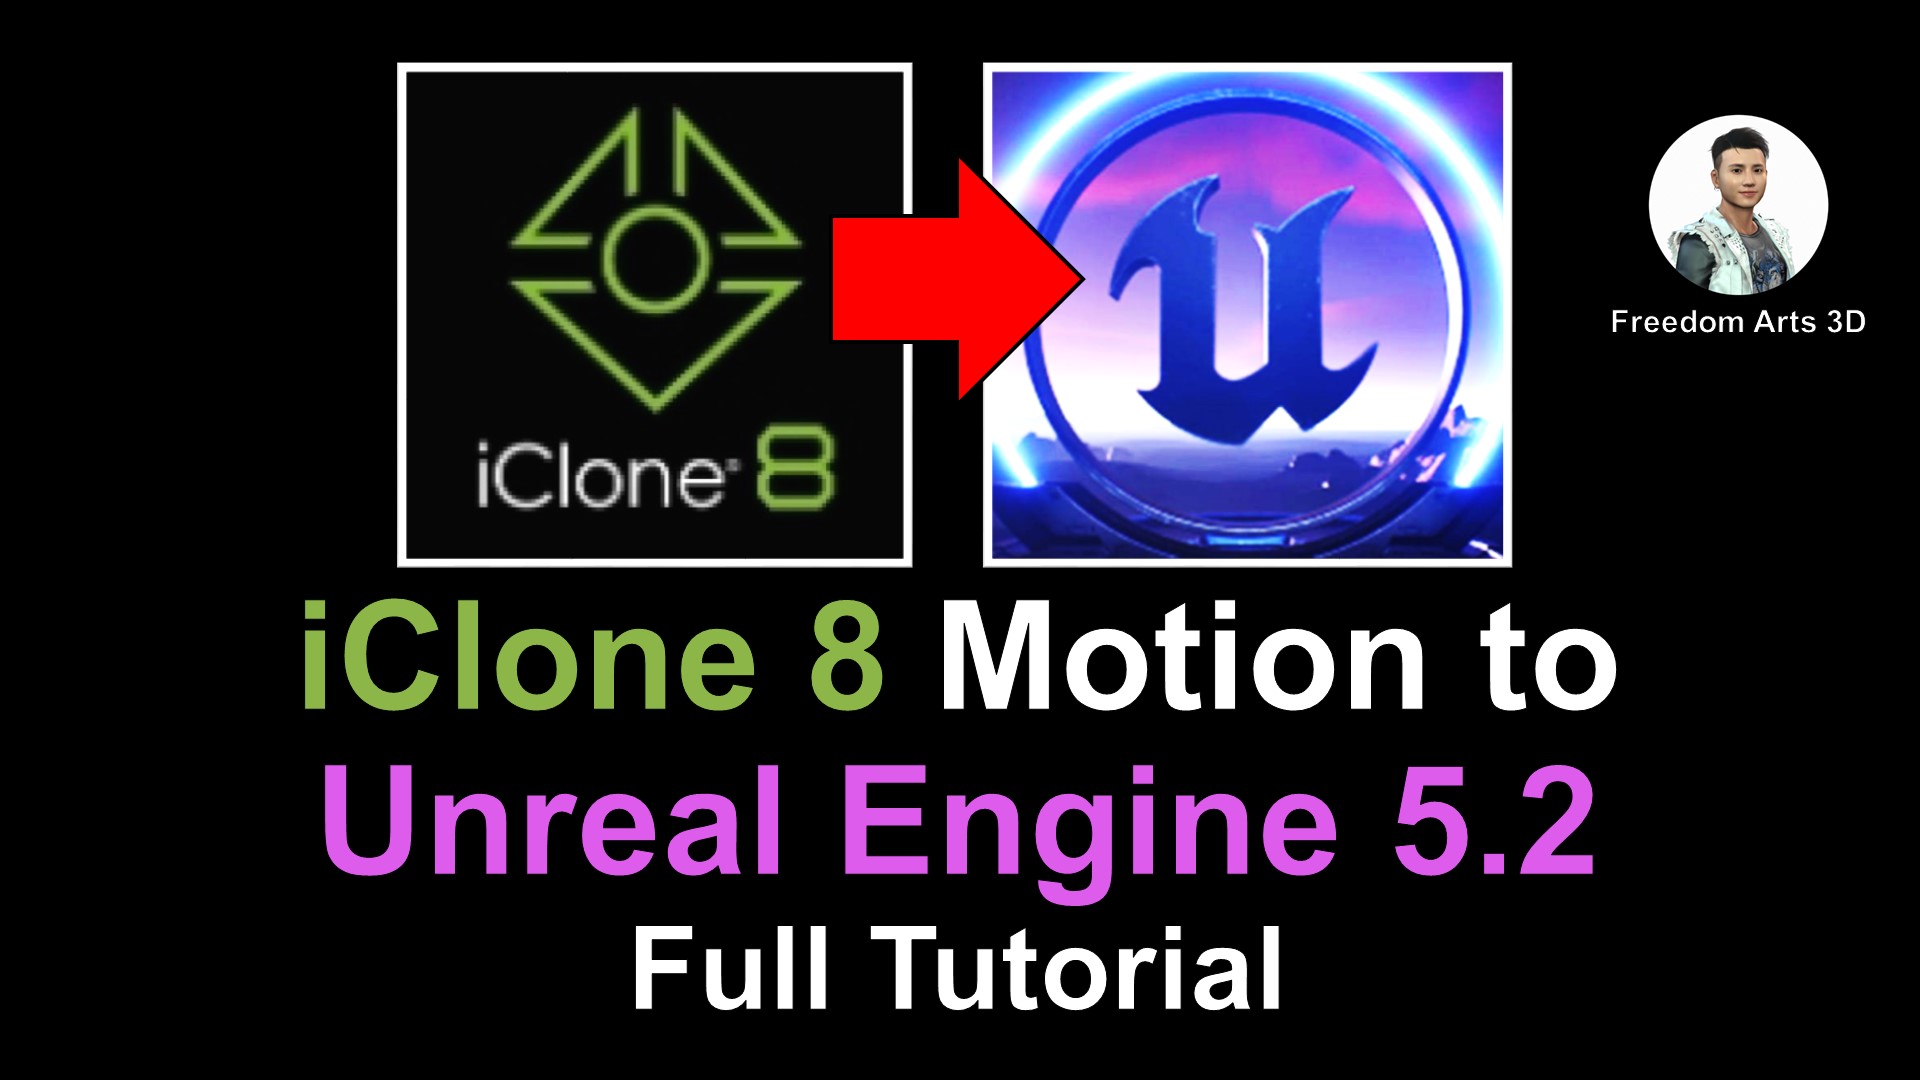 [Tutorial] [UE] [Pipeline] How to Convert iClone 8 Motion to Unreal Engine 5.2 and Retarget on Any 3D Avatar